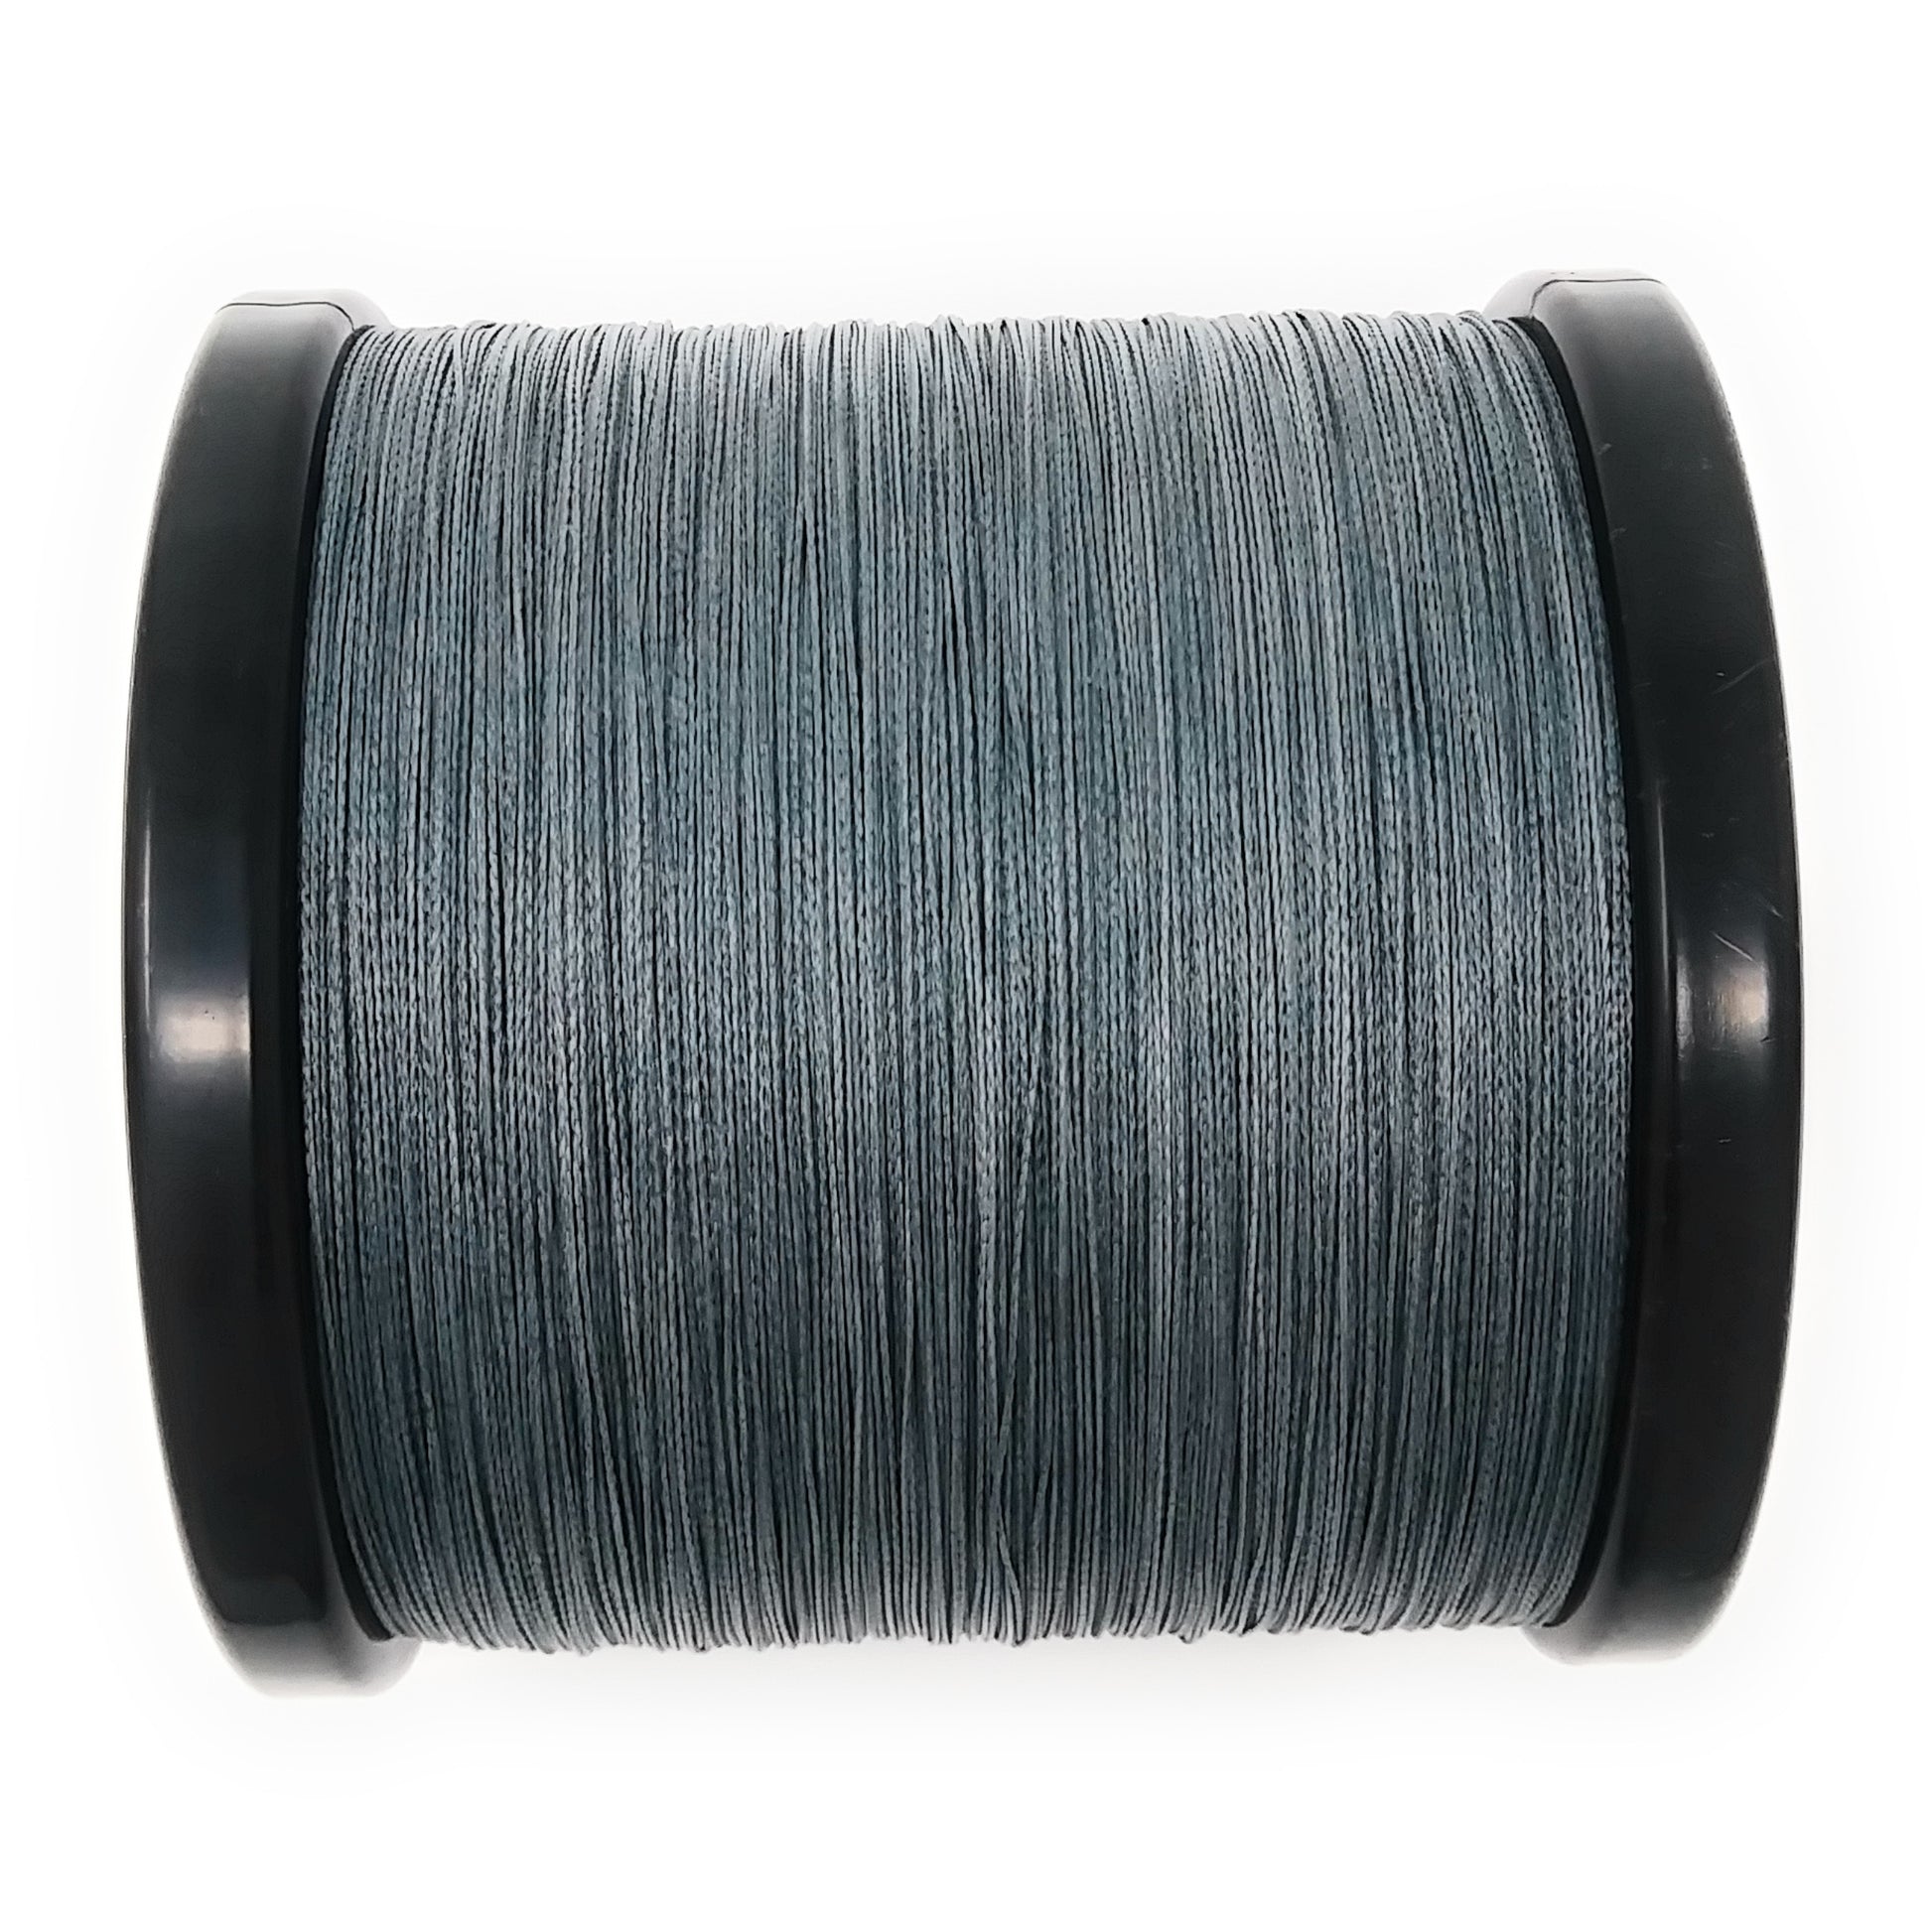 GetUSCart- Reaction Tackle Braided Fishing Line Low Vis Gray 100LB 1500yd